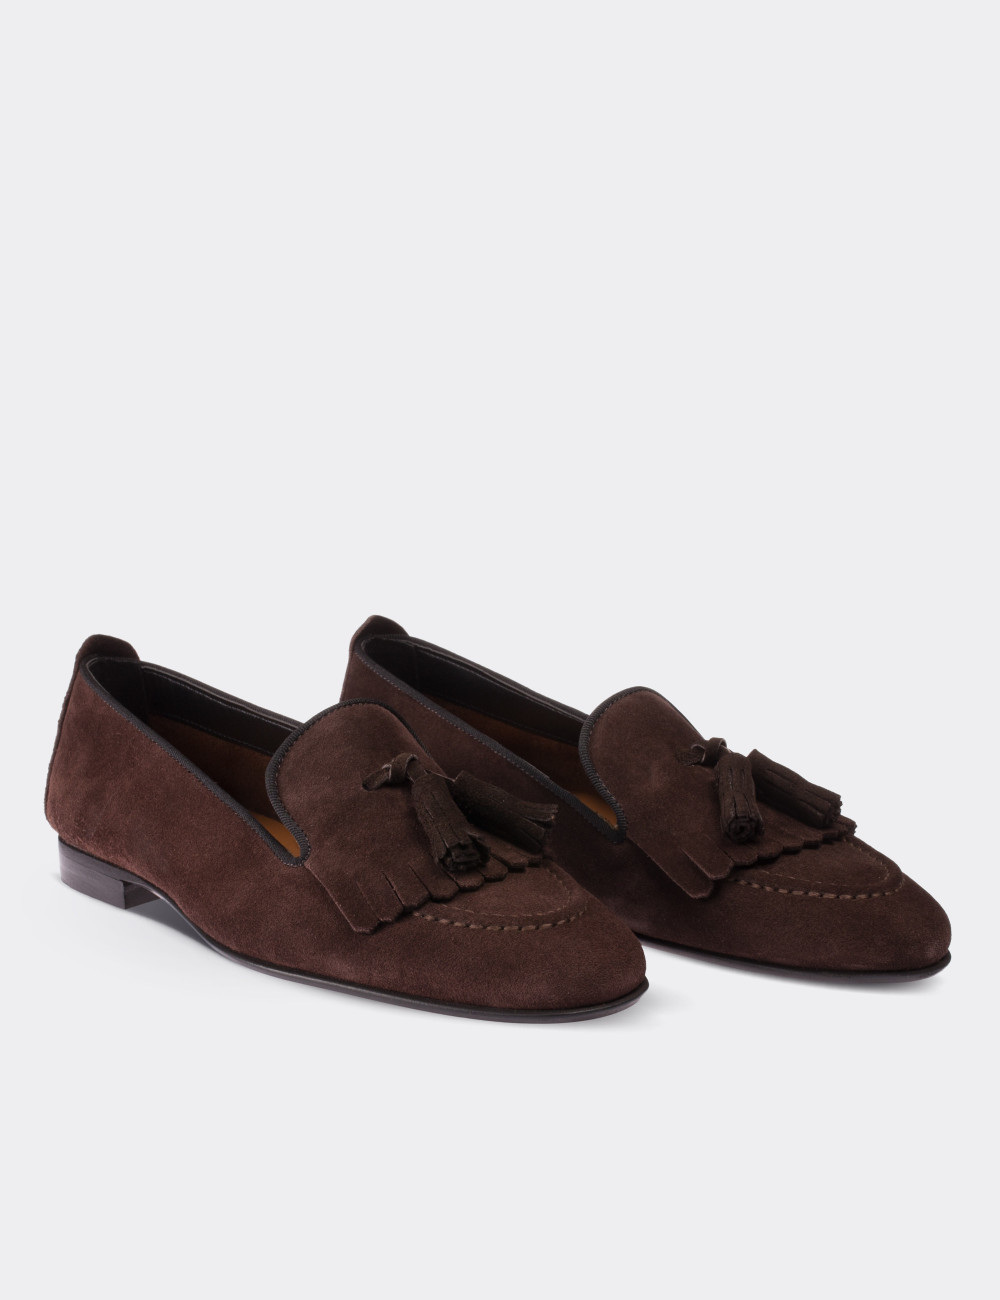 Brown Suede Leather Loafers - 01618ZKHVM01